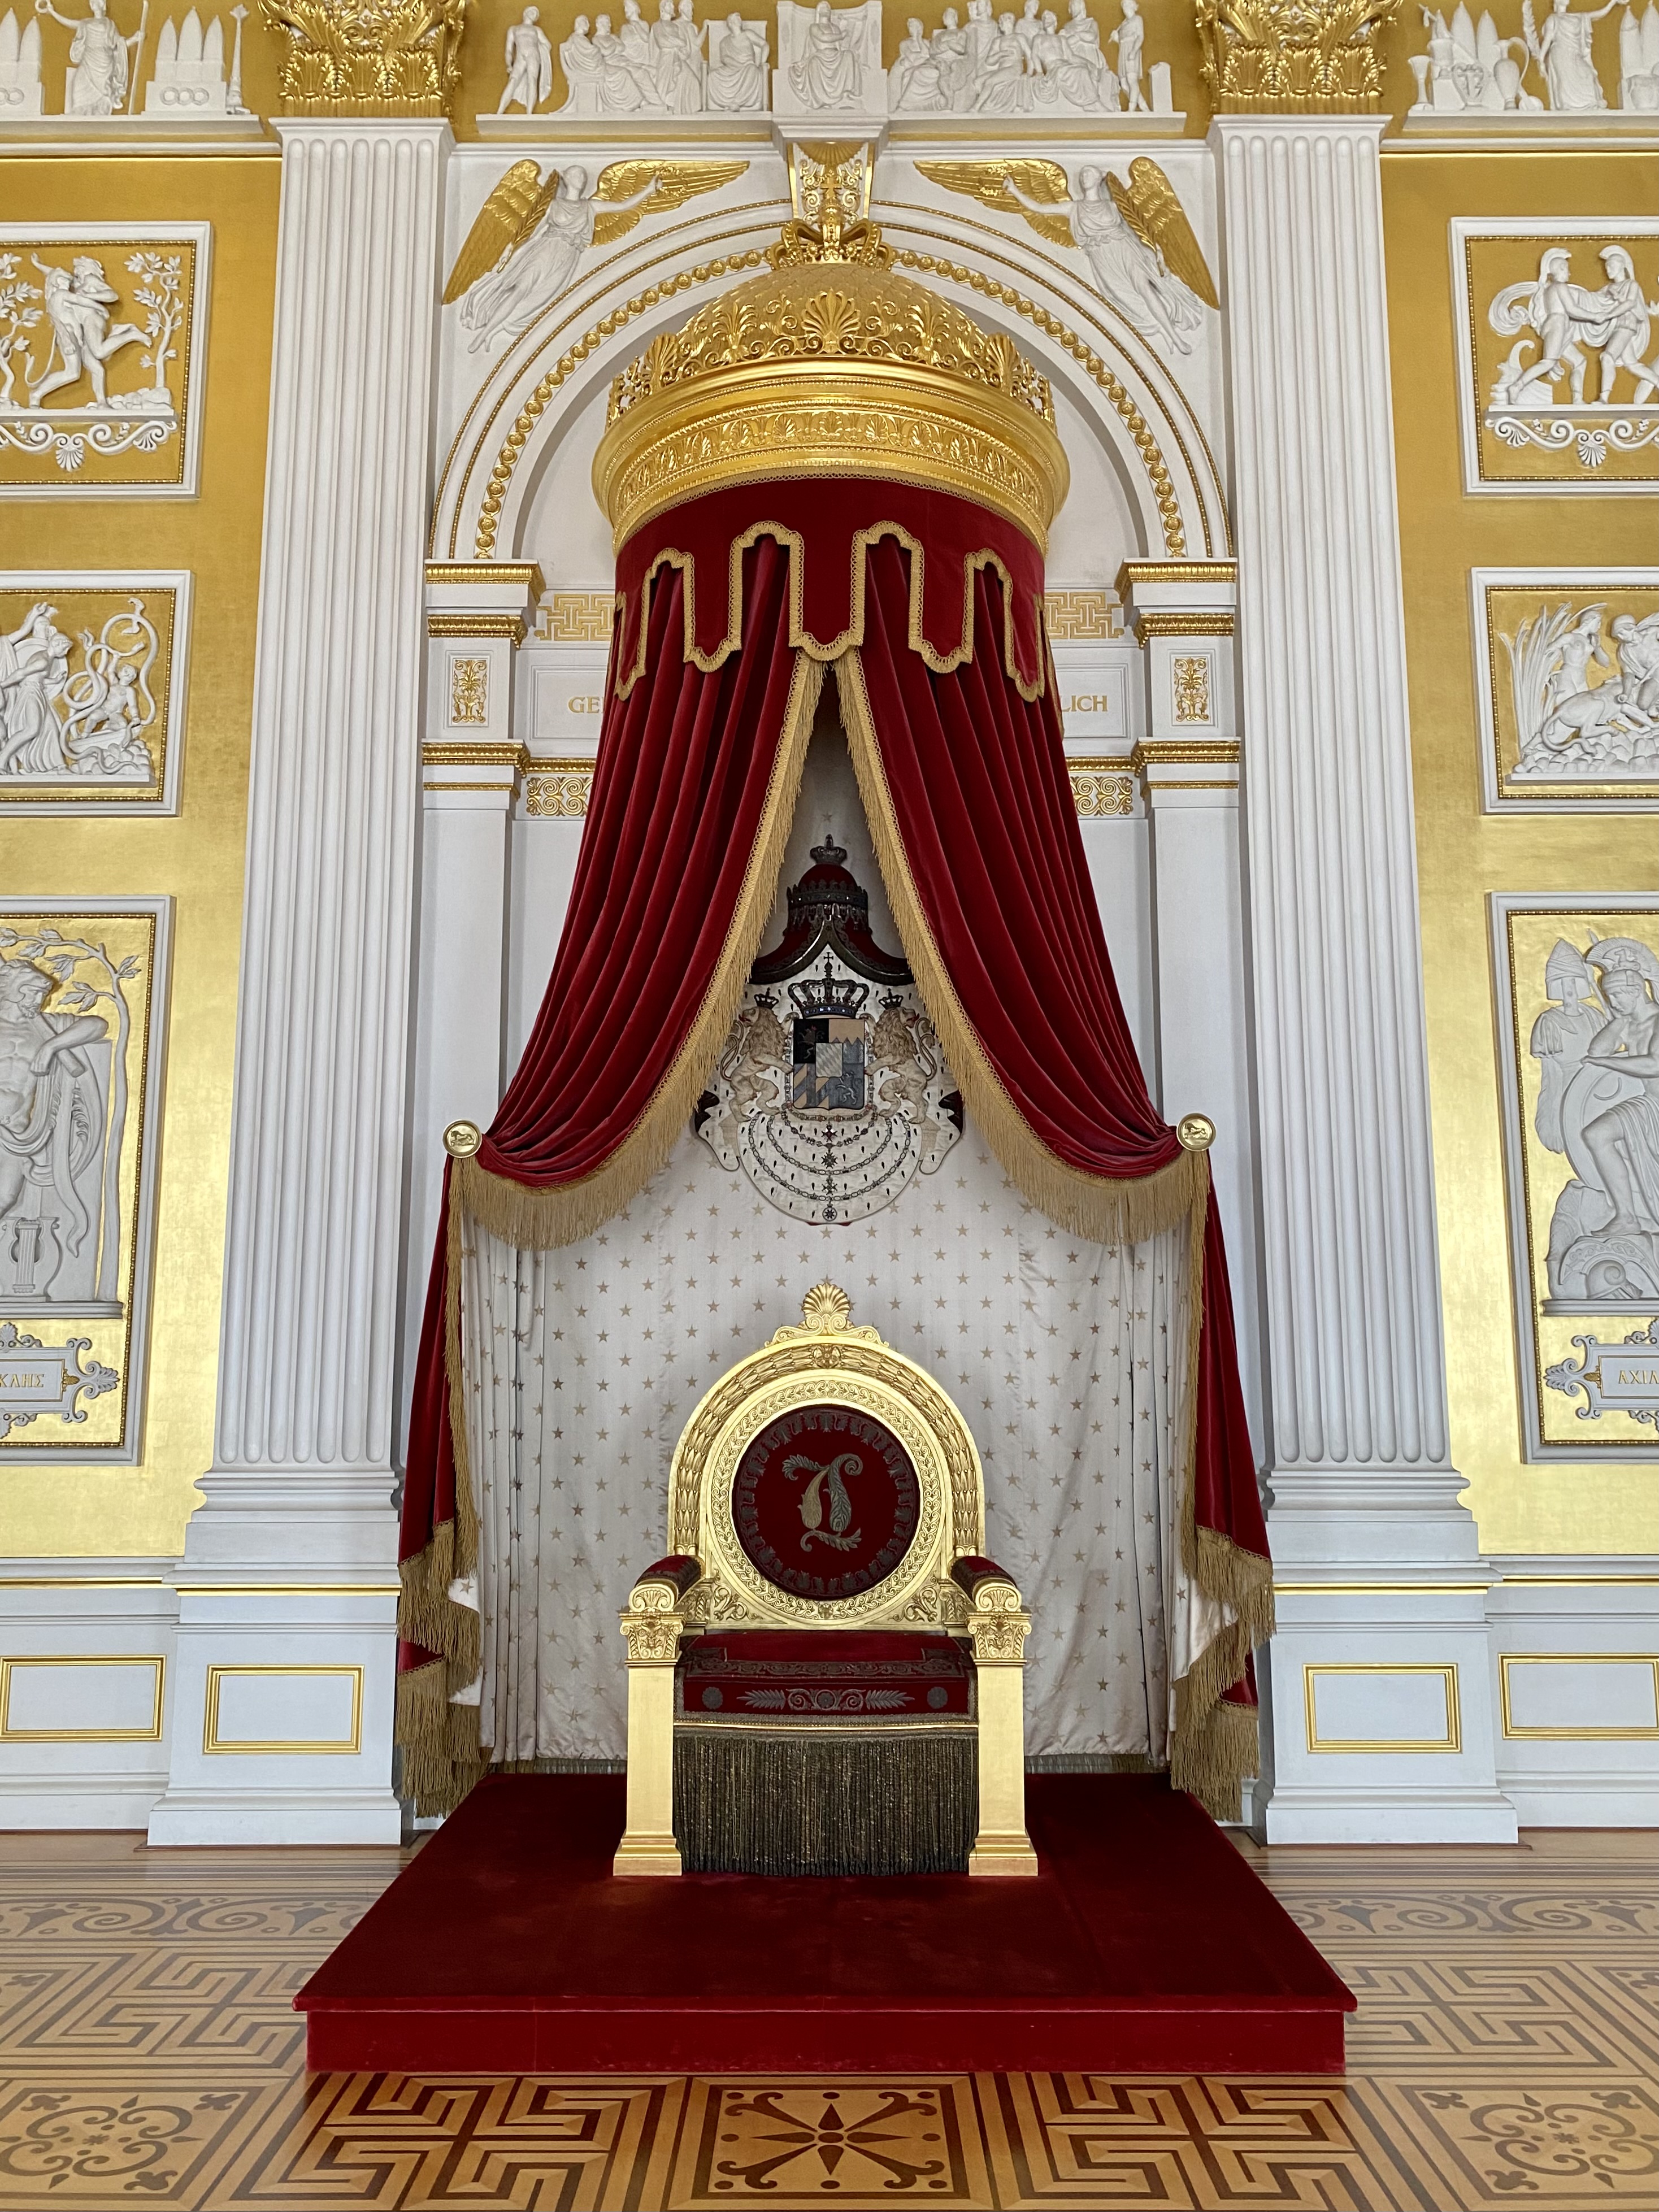 Red and gold royal chair on a platform under a red and gold canopy